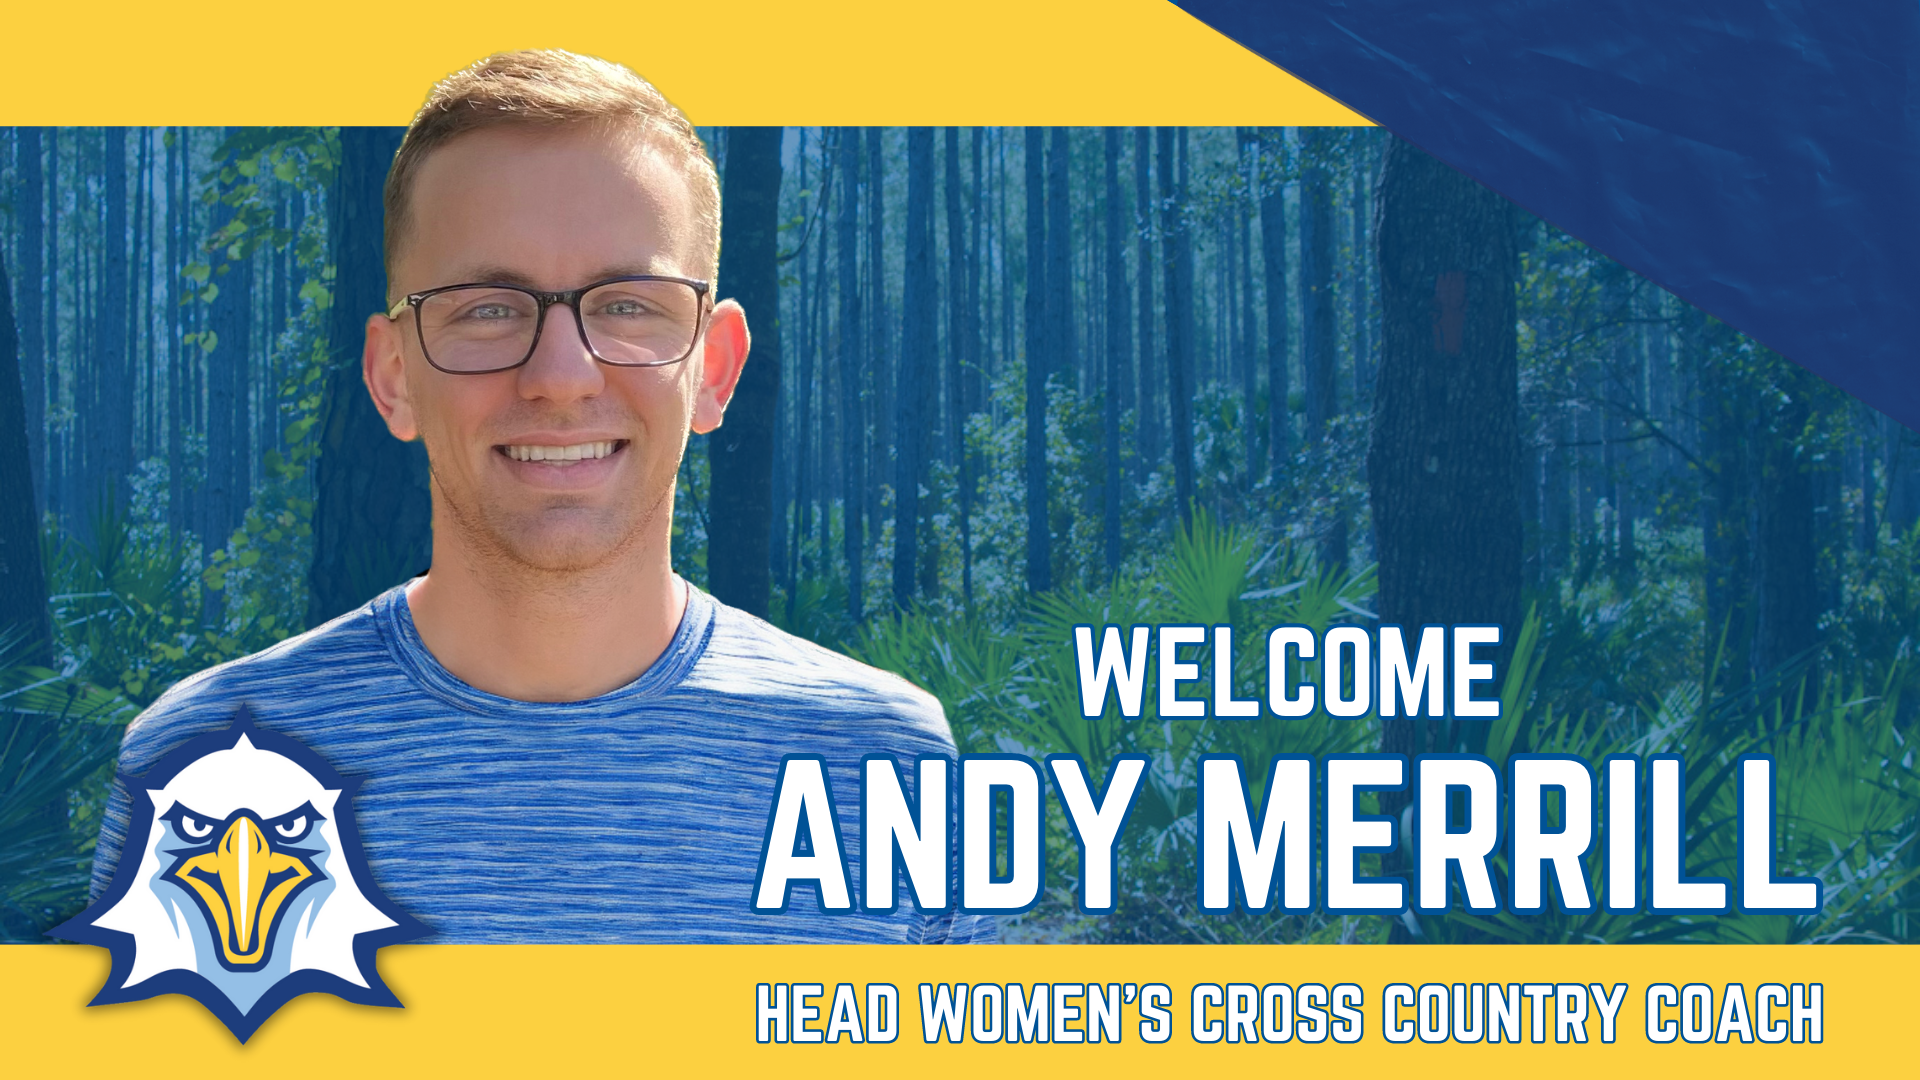 Andy Merrill named new women's cross country coach